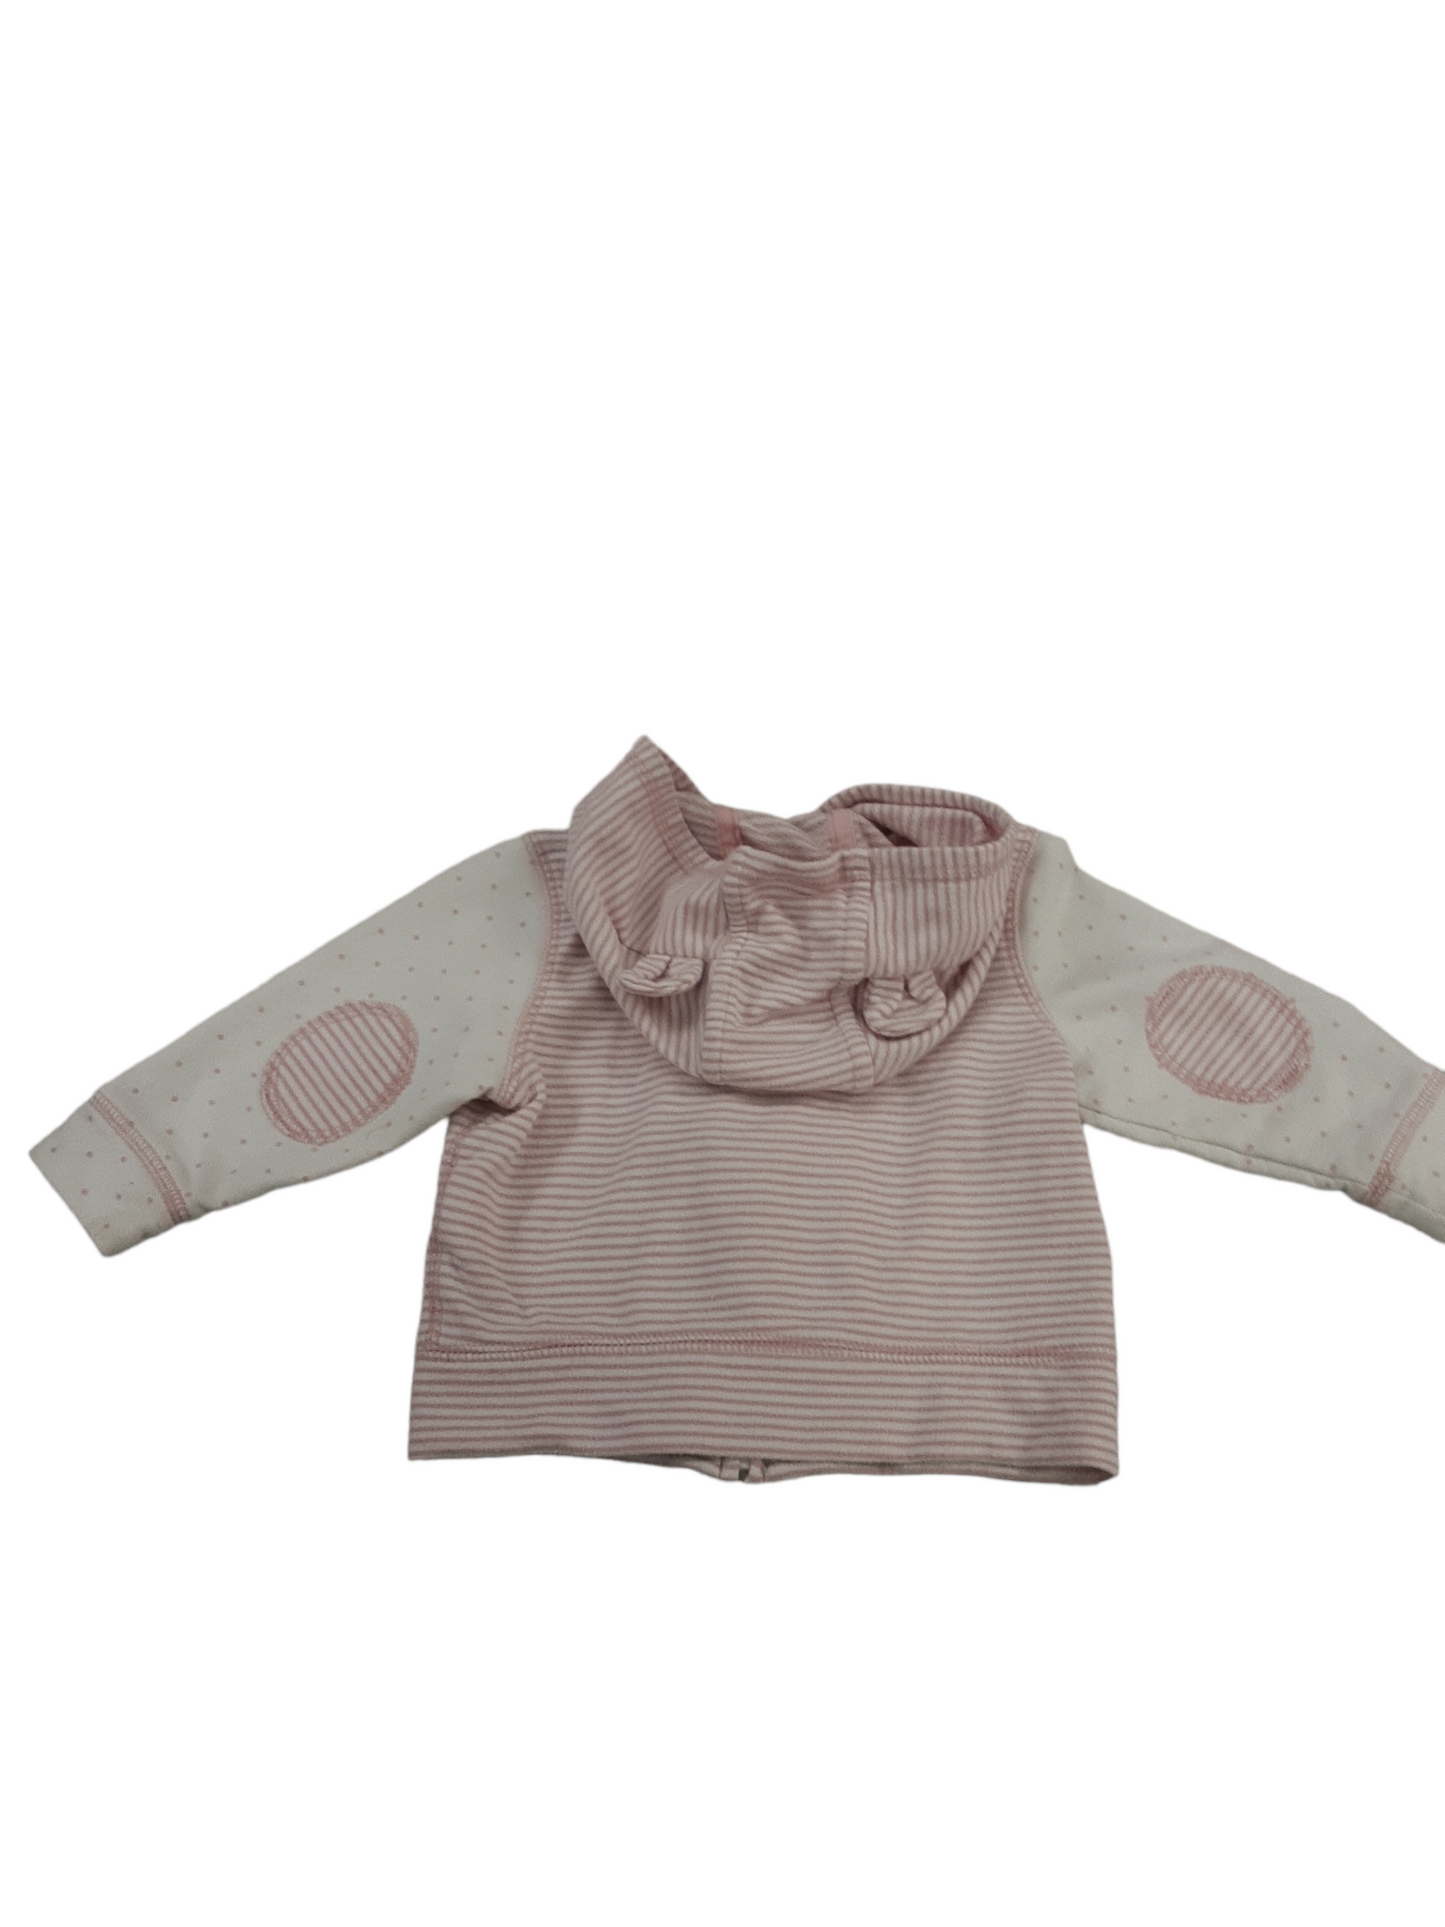 Lightweight hoodie with ears size 12-18months